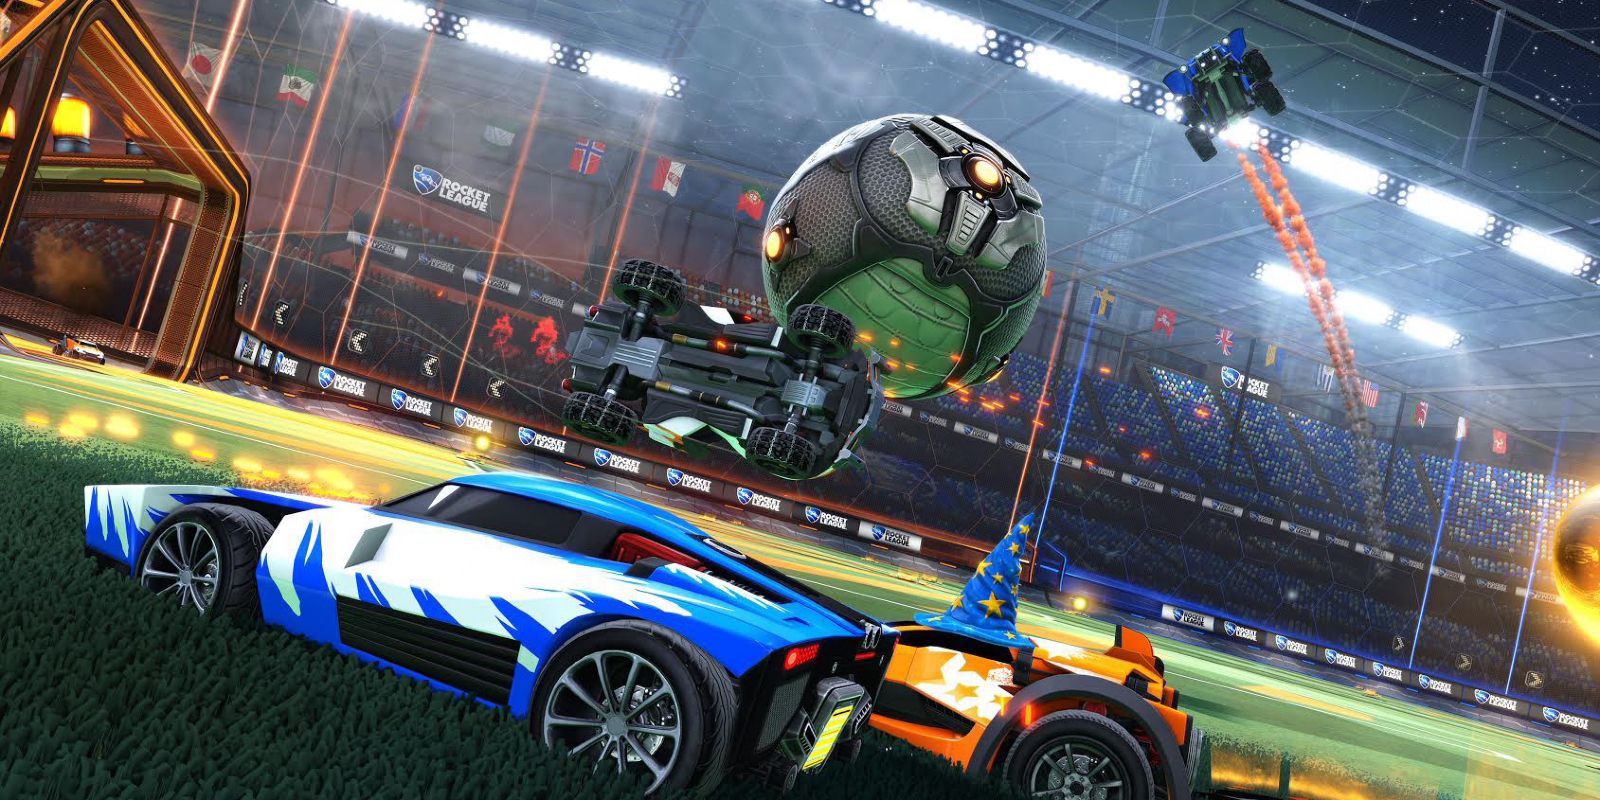 2v2 Tournaments and More Coming in Season 4